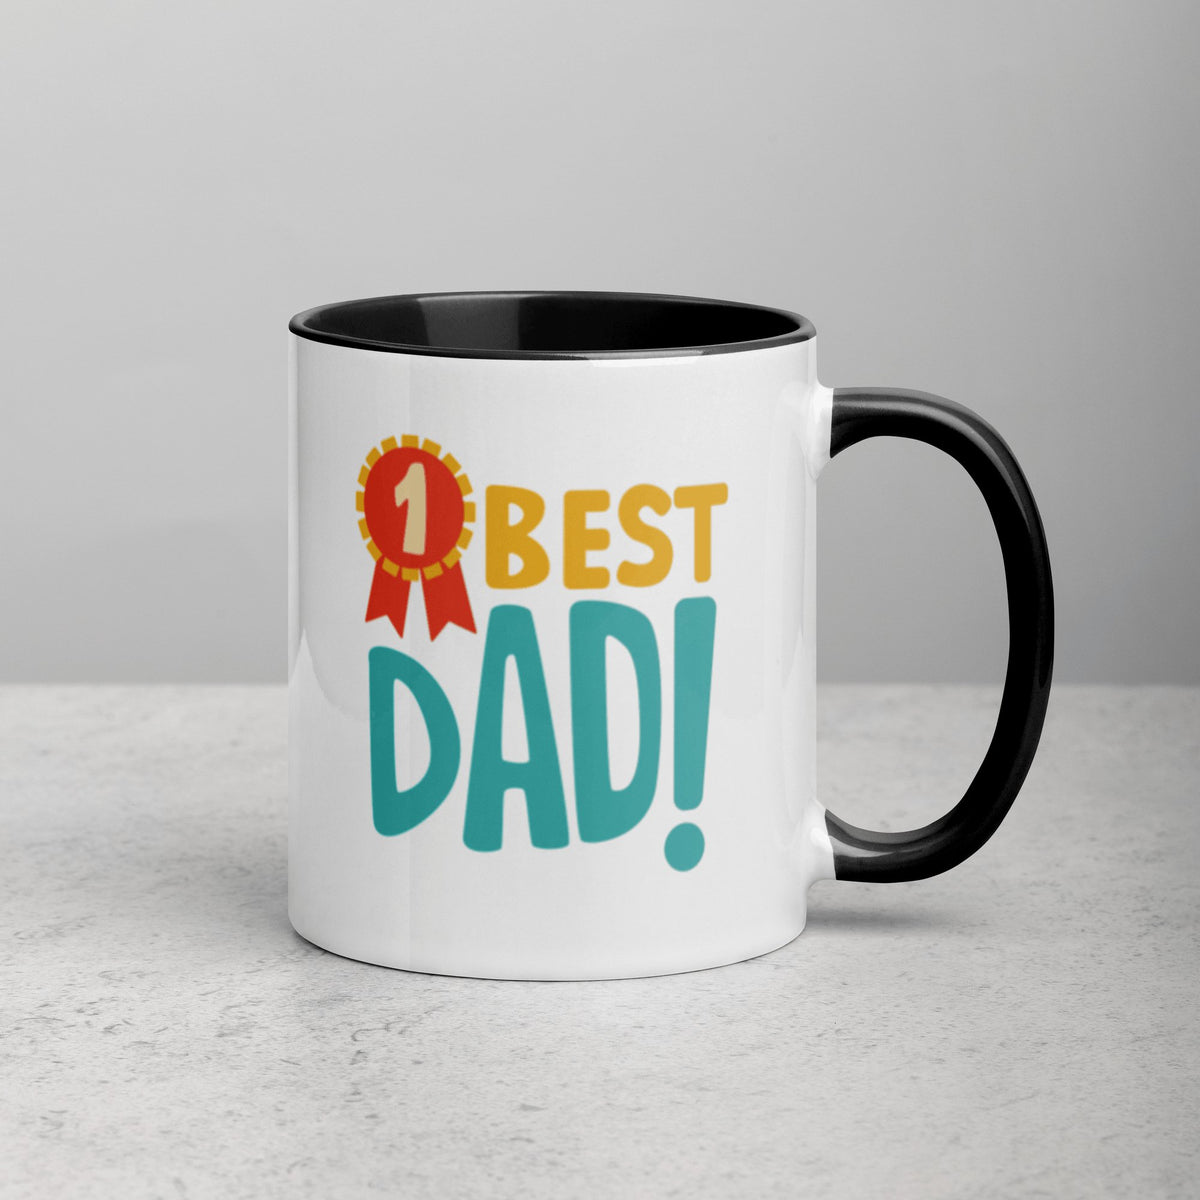 #1 Best Dad Colored mug gift for fathers day 11 oz - Eventwisecreations